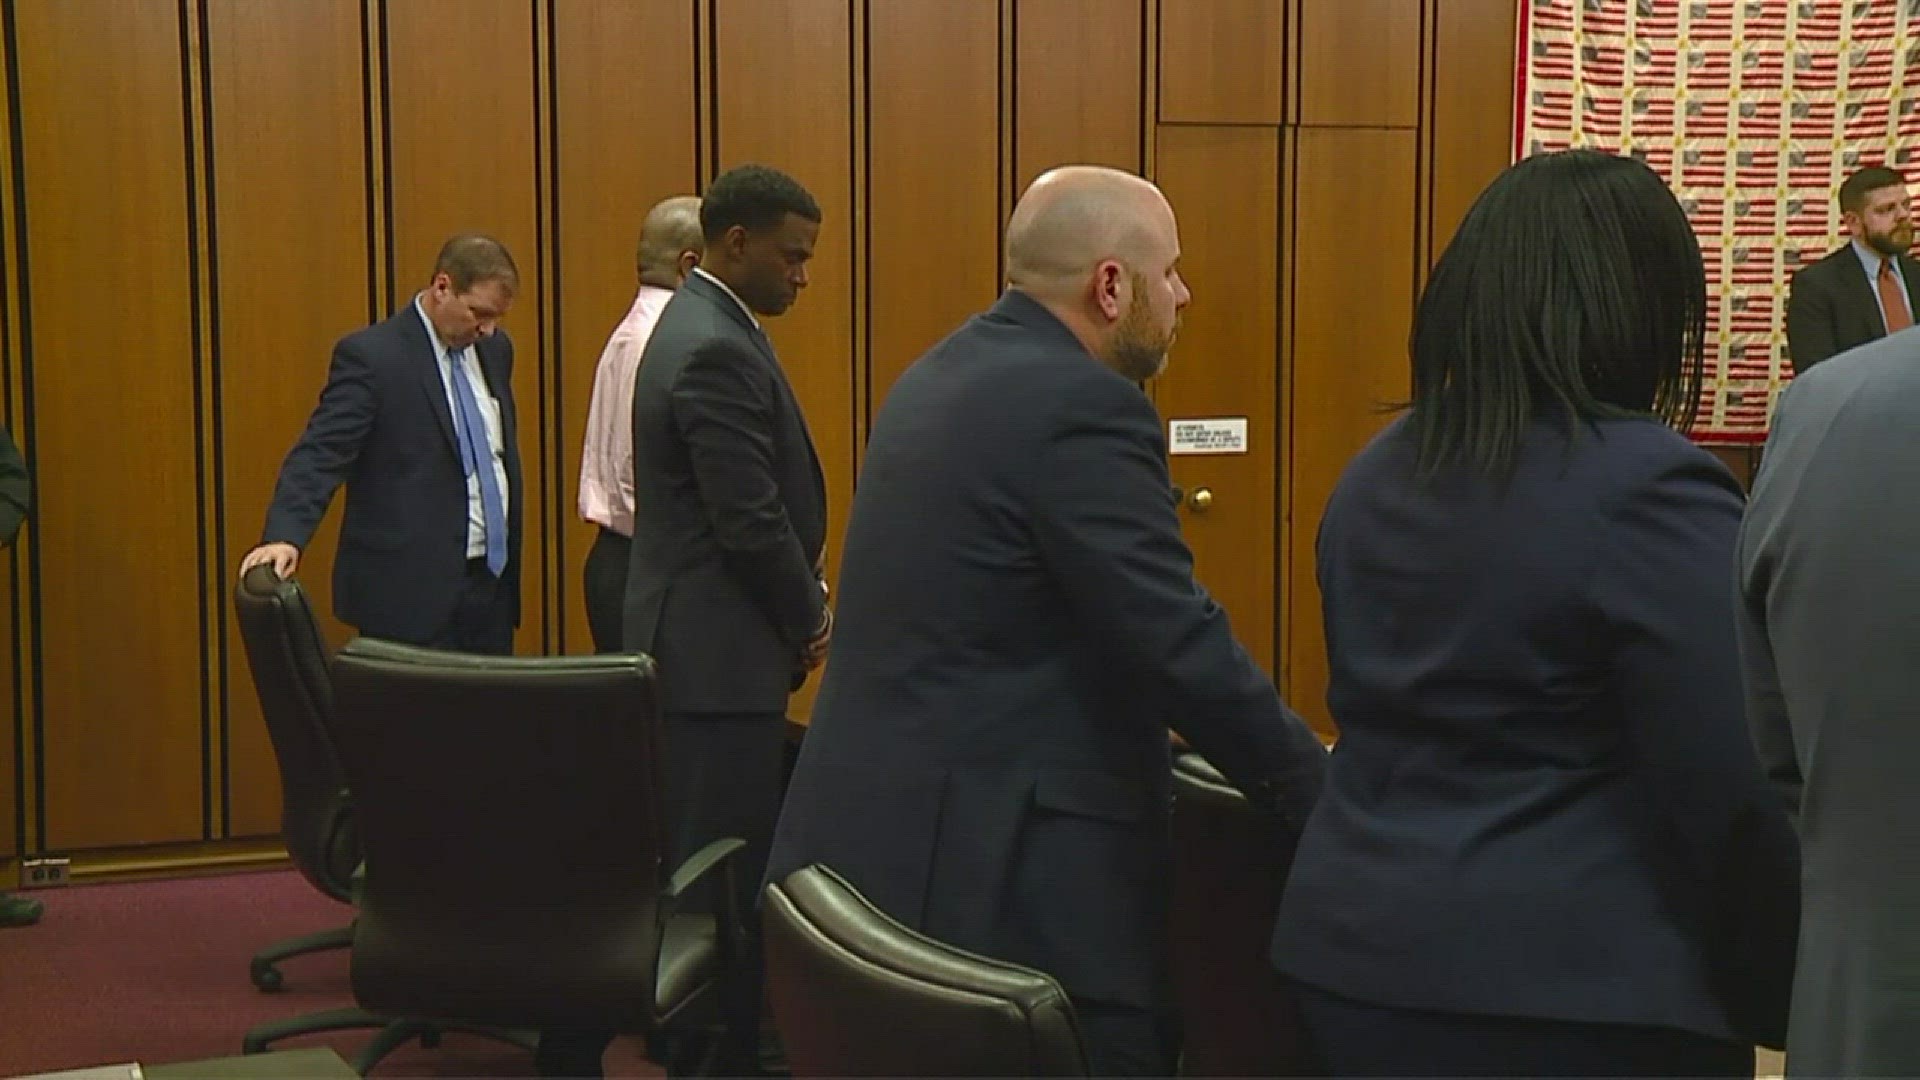 A jury recommends the death penalty for Christopher Whitaker, the man convicted of killing 14-year-old Alianna DeFreeze.